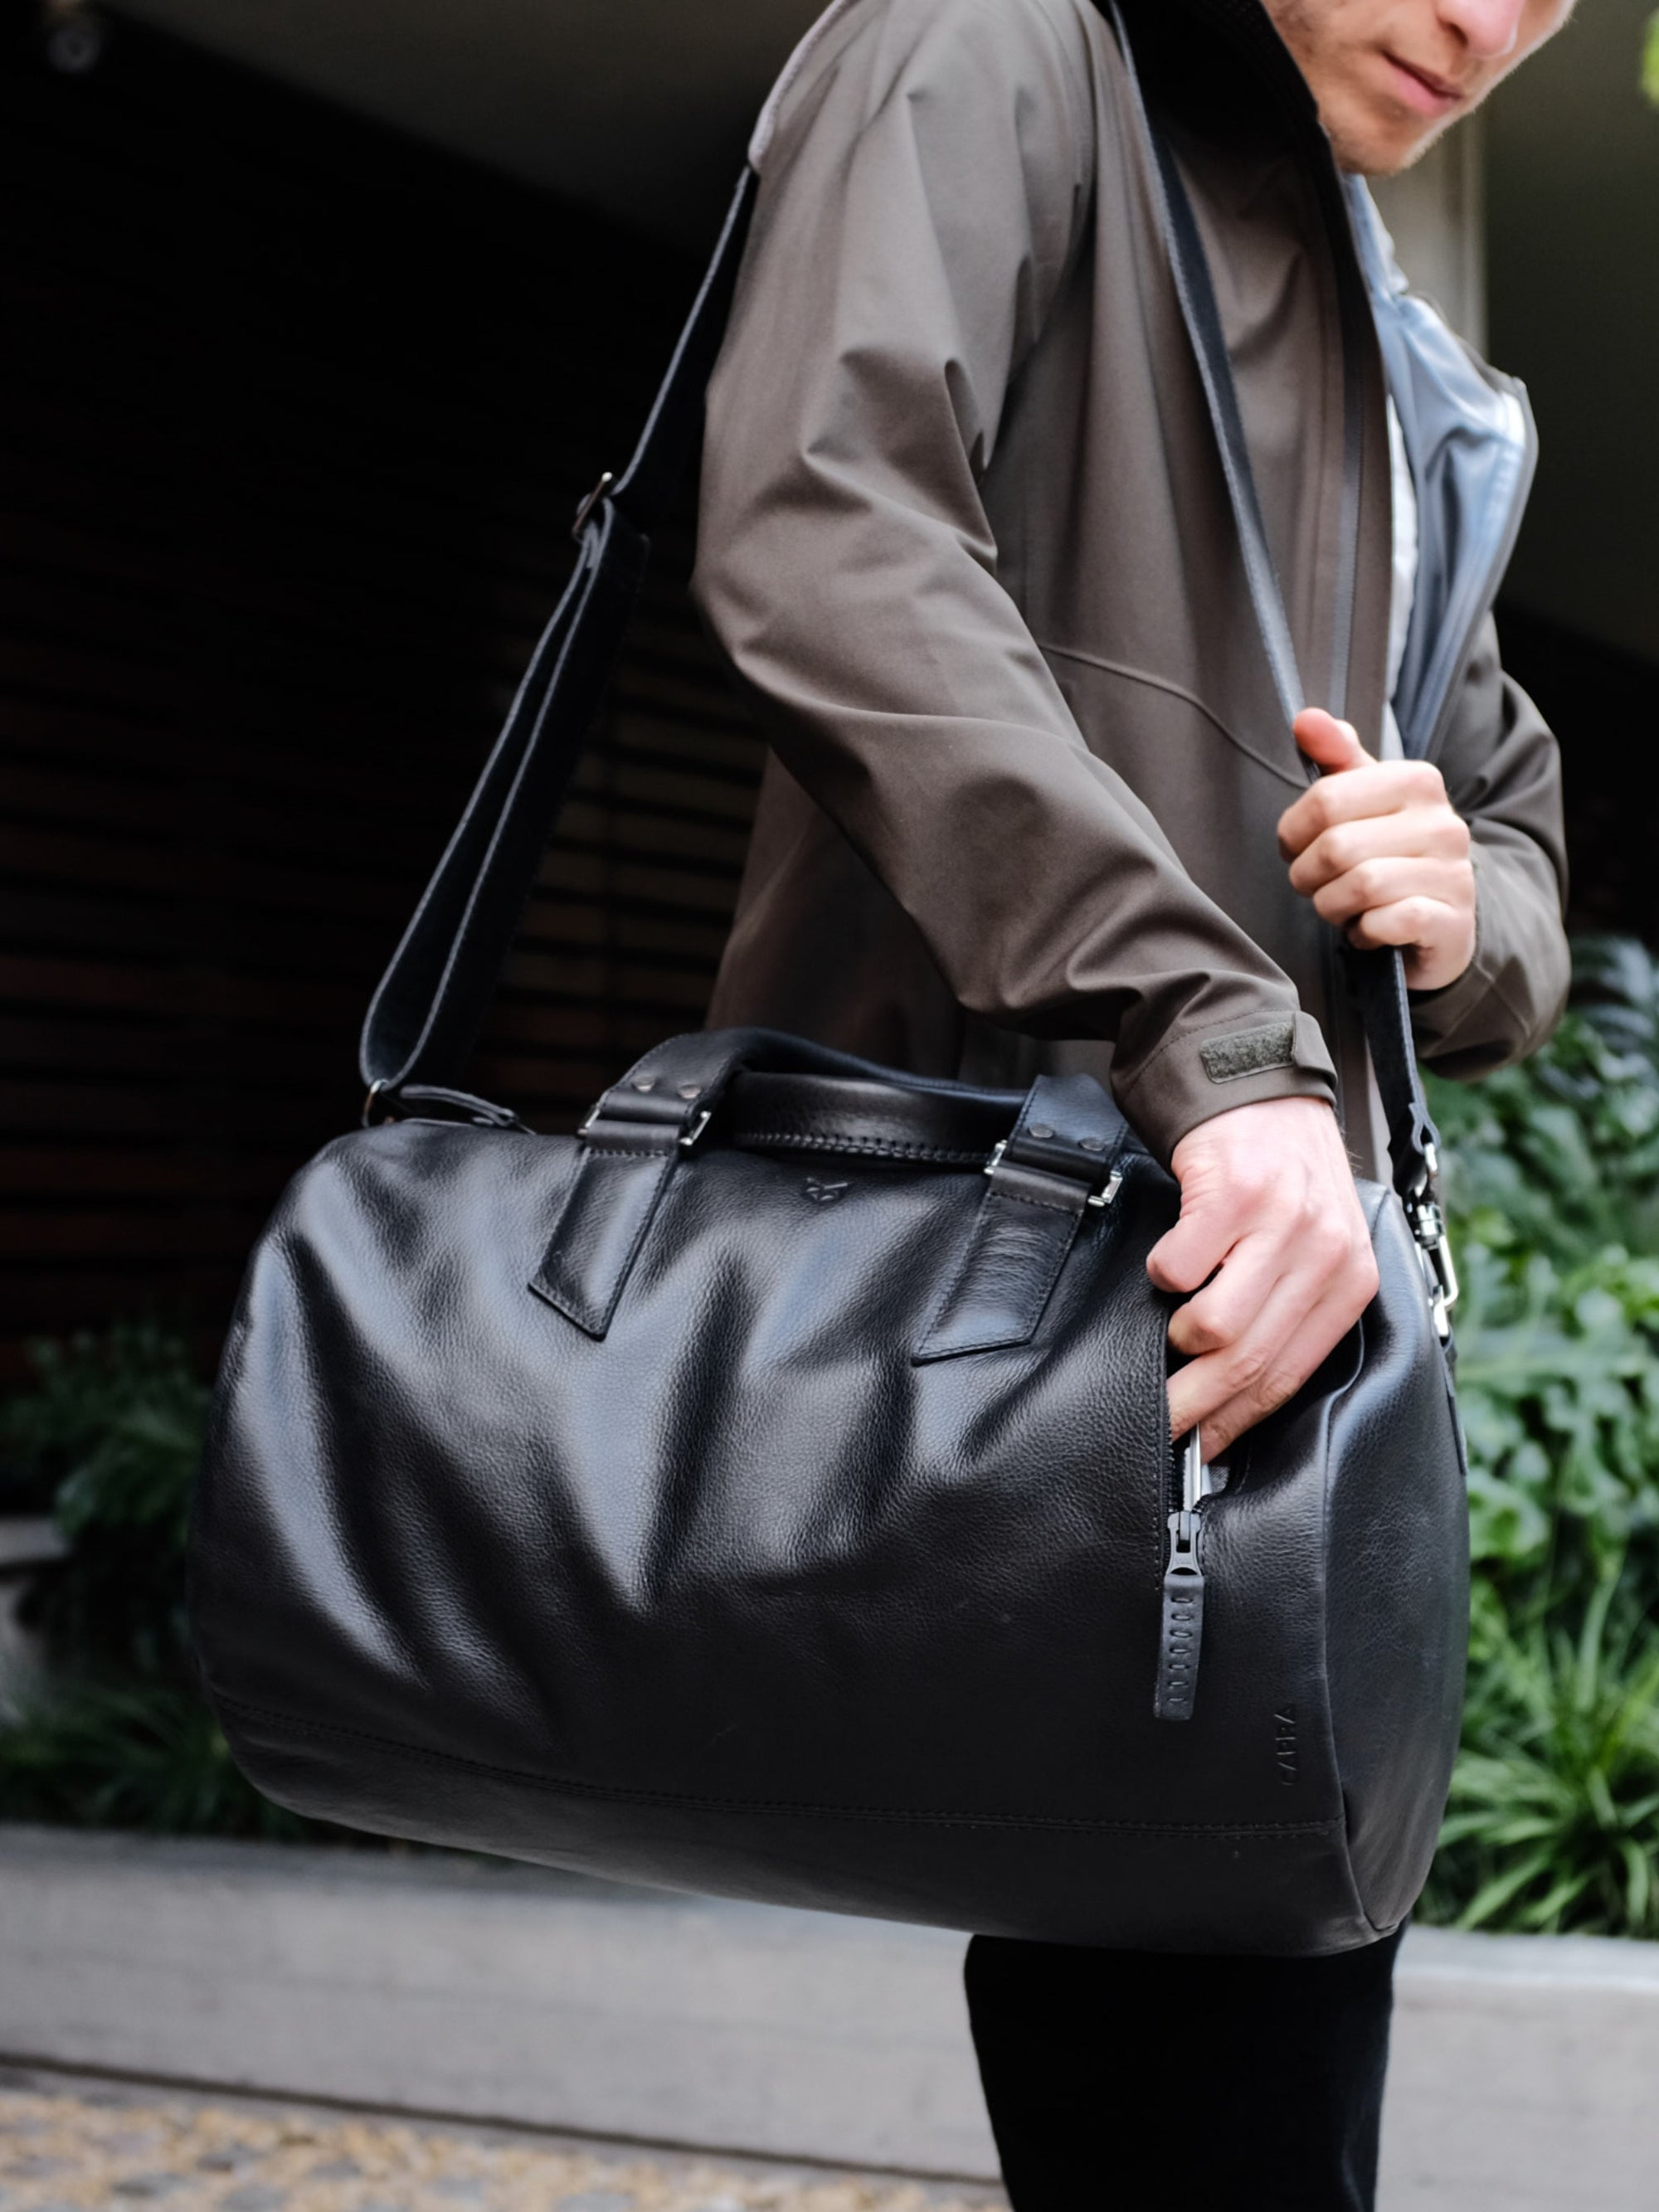 Substantial Duffle Bag Size Guide by Capra Leather